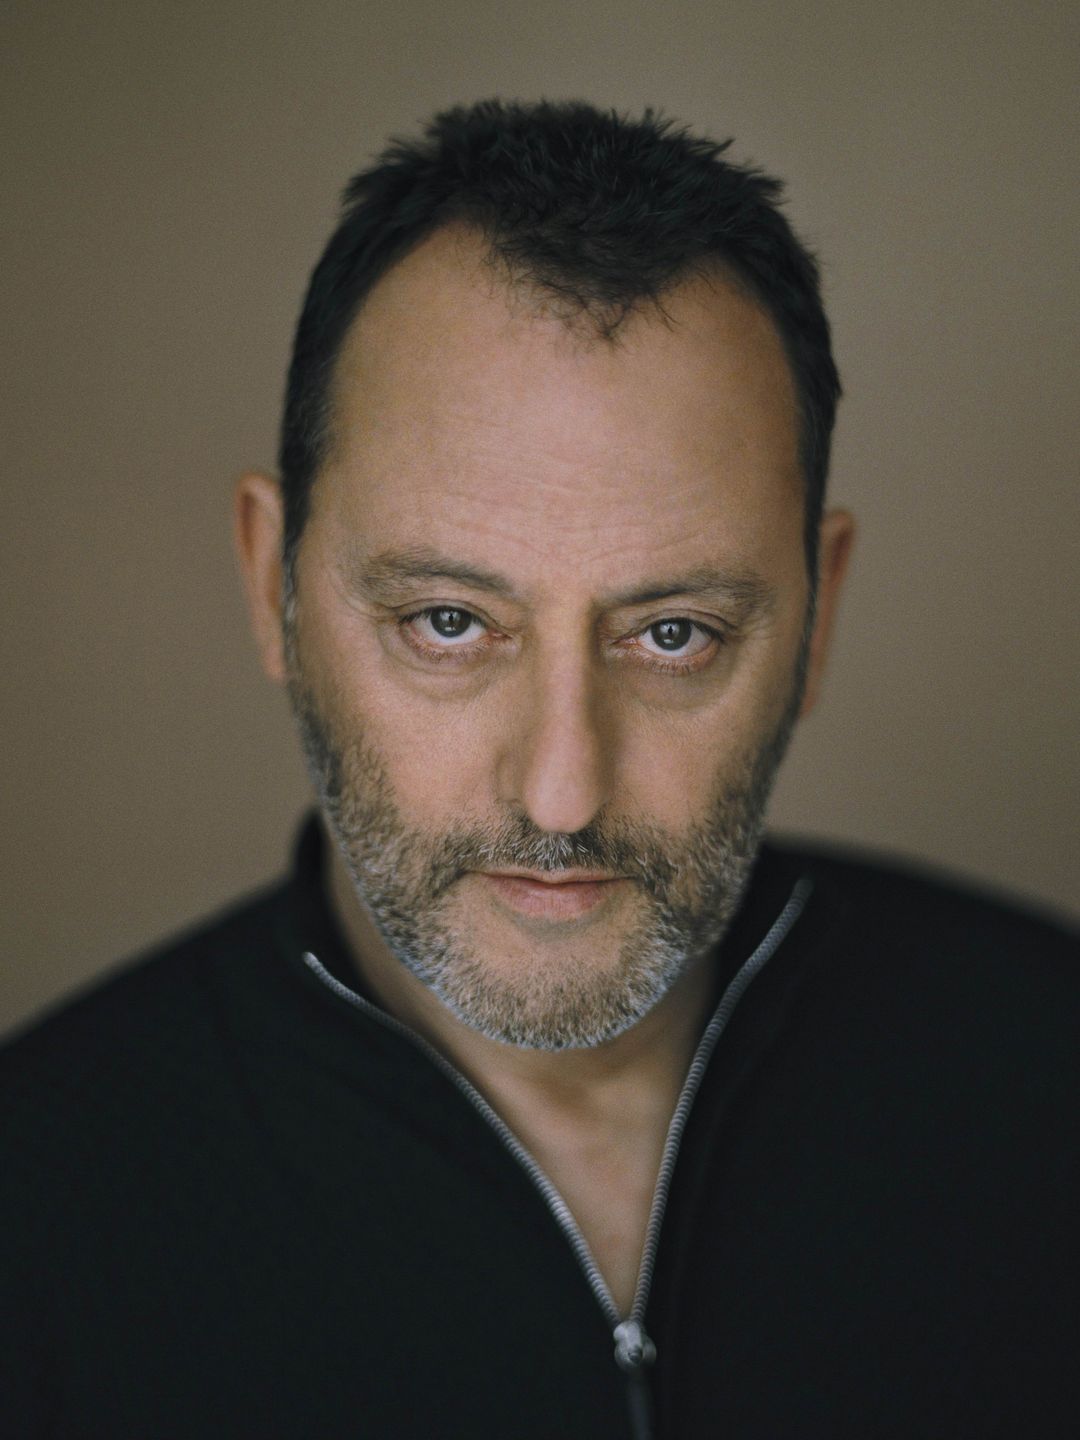 Jean Reno who is his father